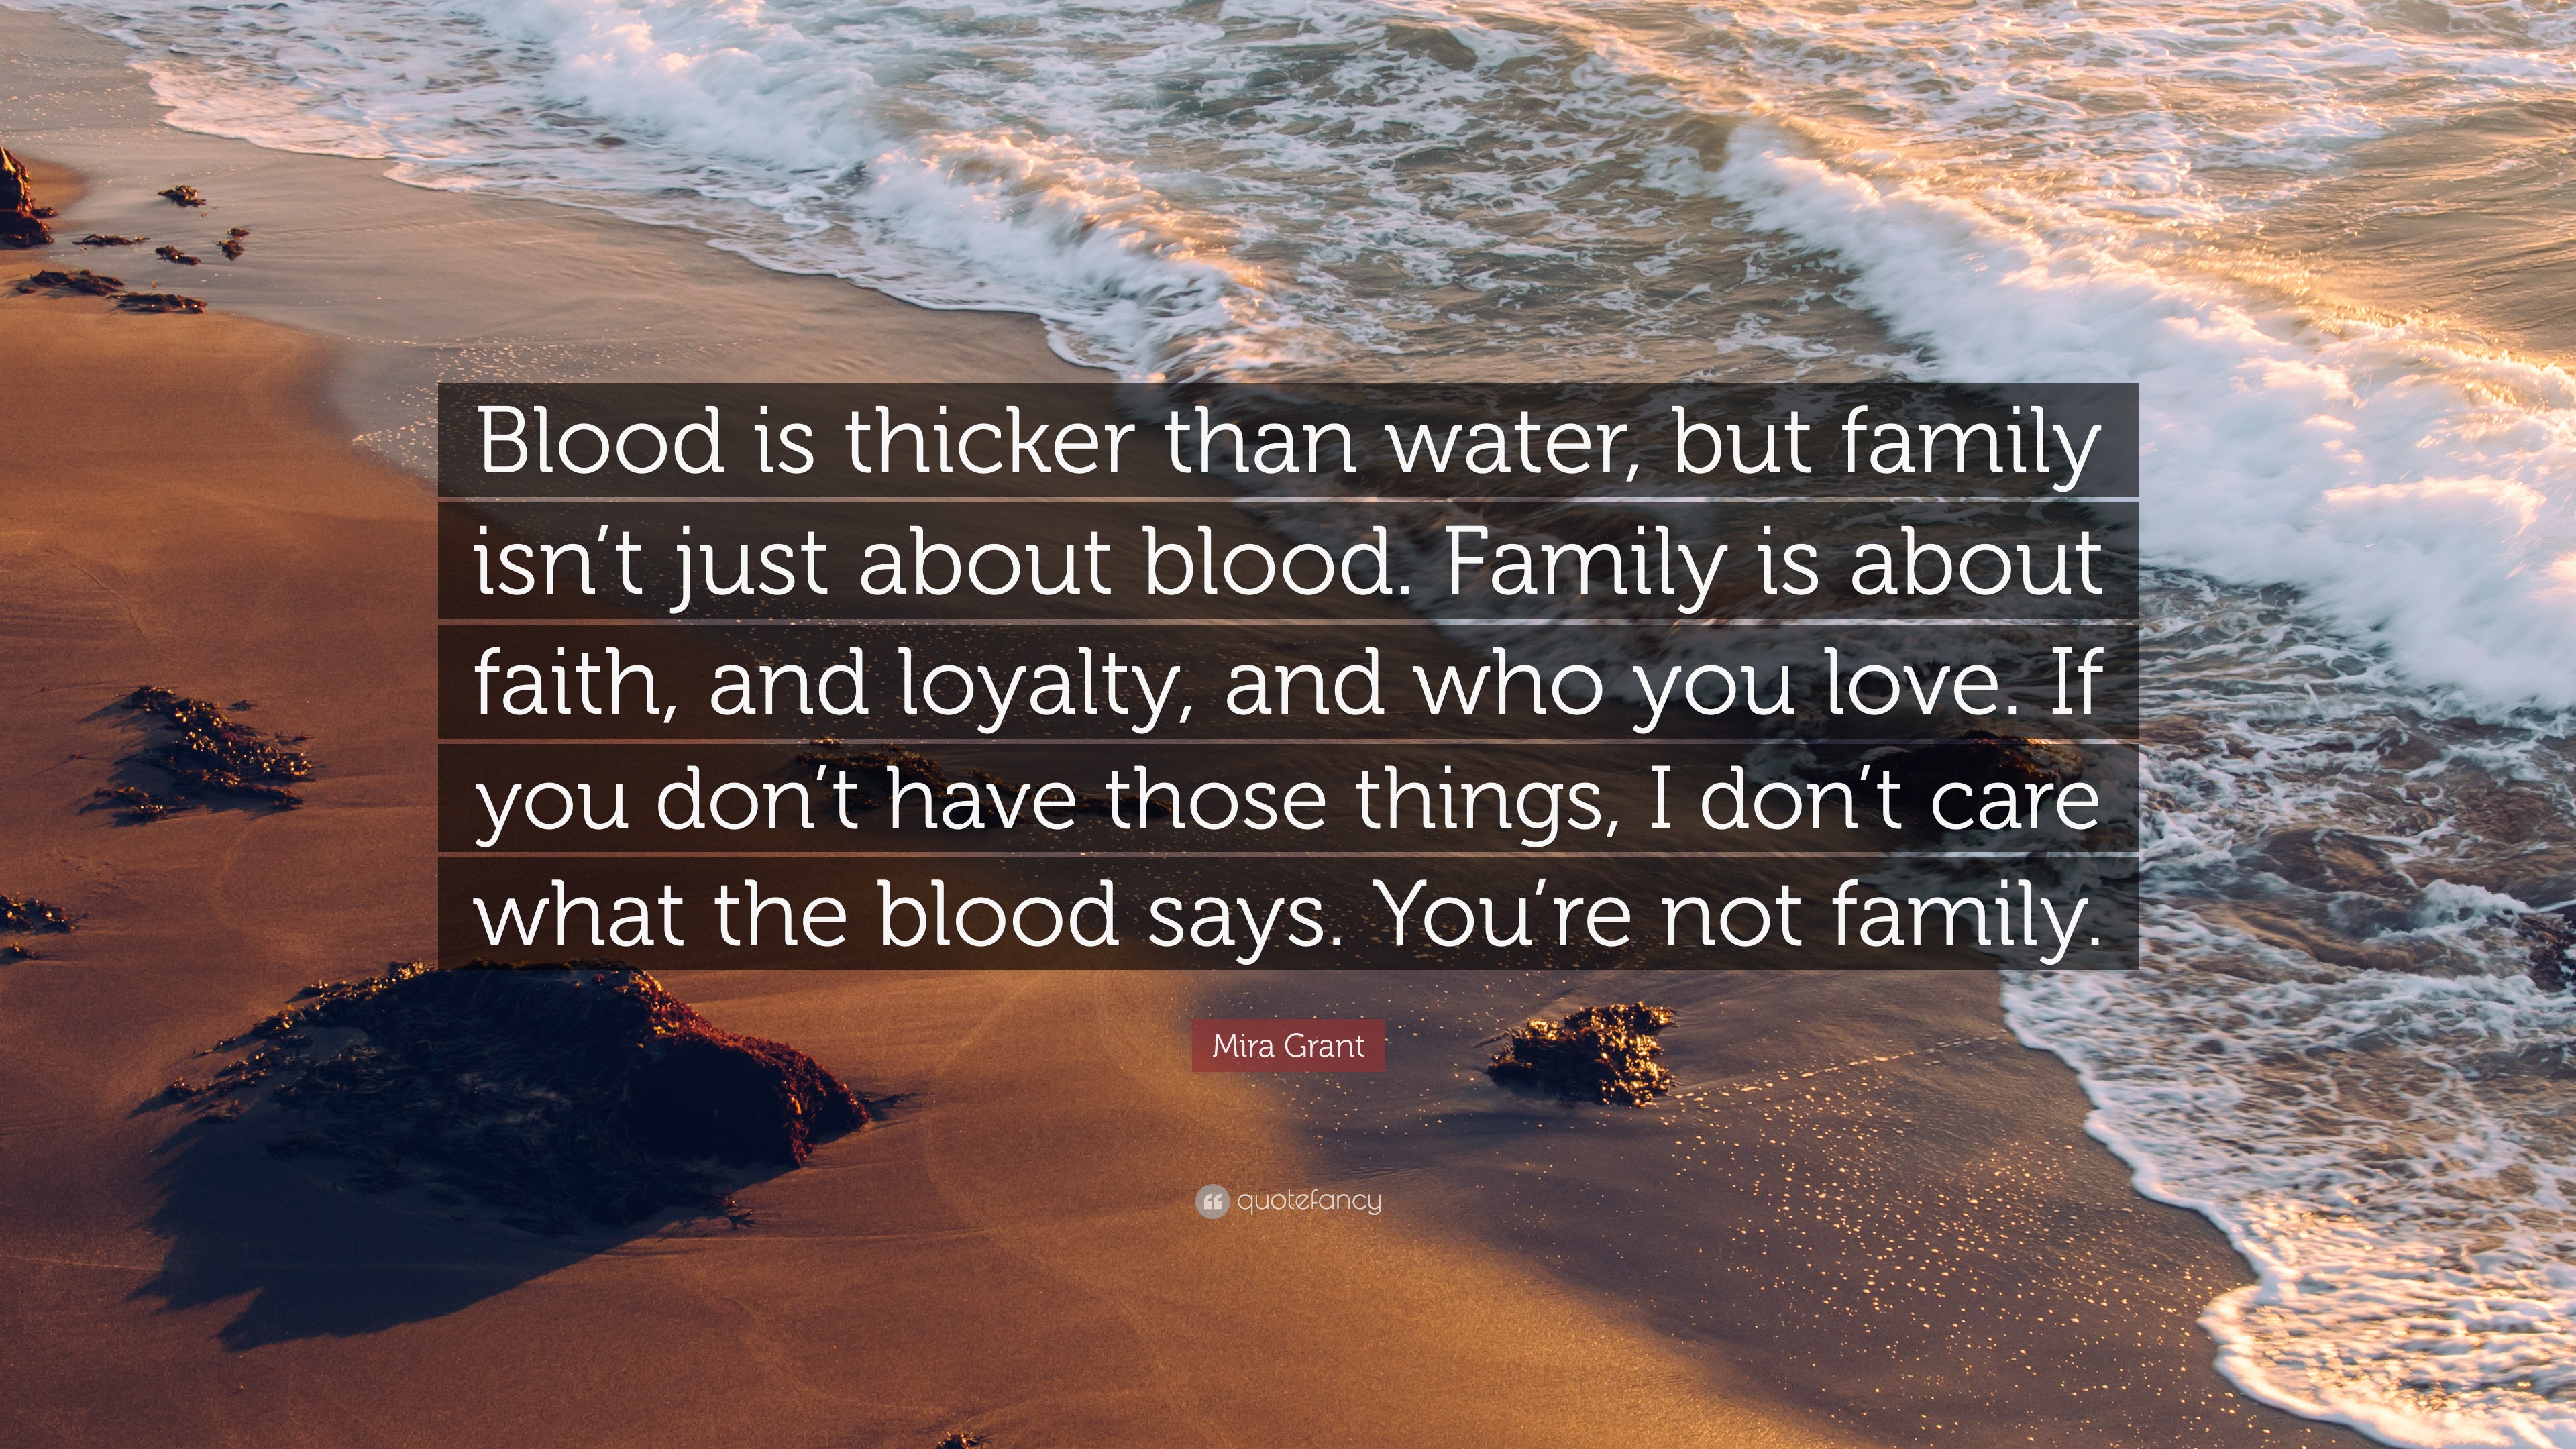 Mira Grant Quote: “Blood is thicker than water, but family isn’t just